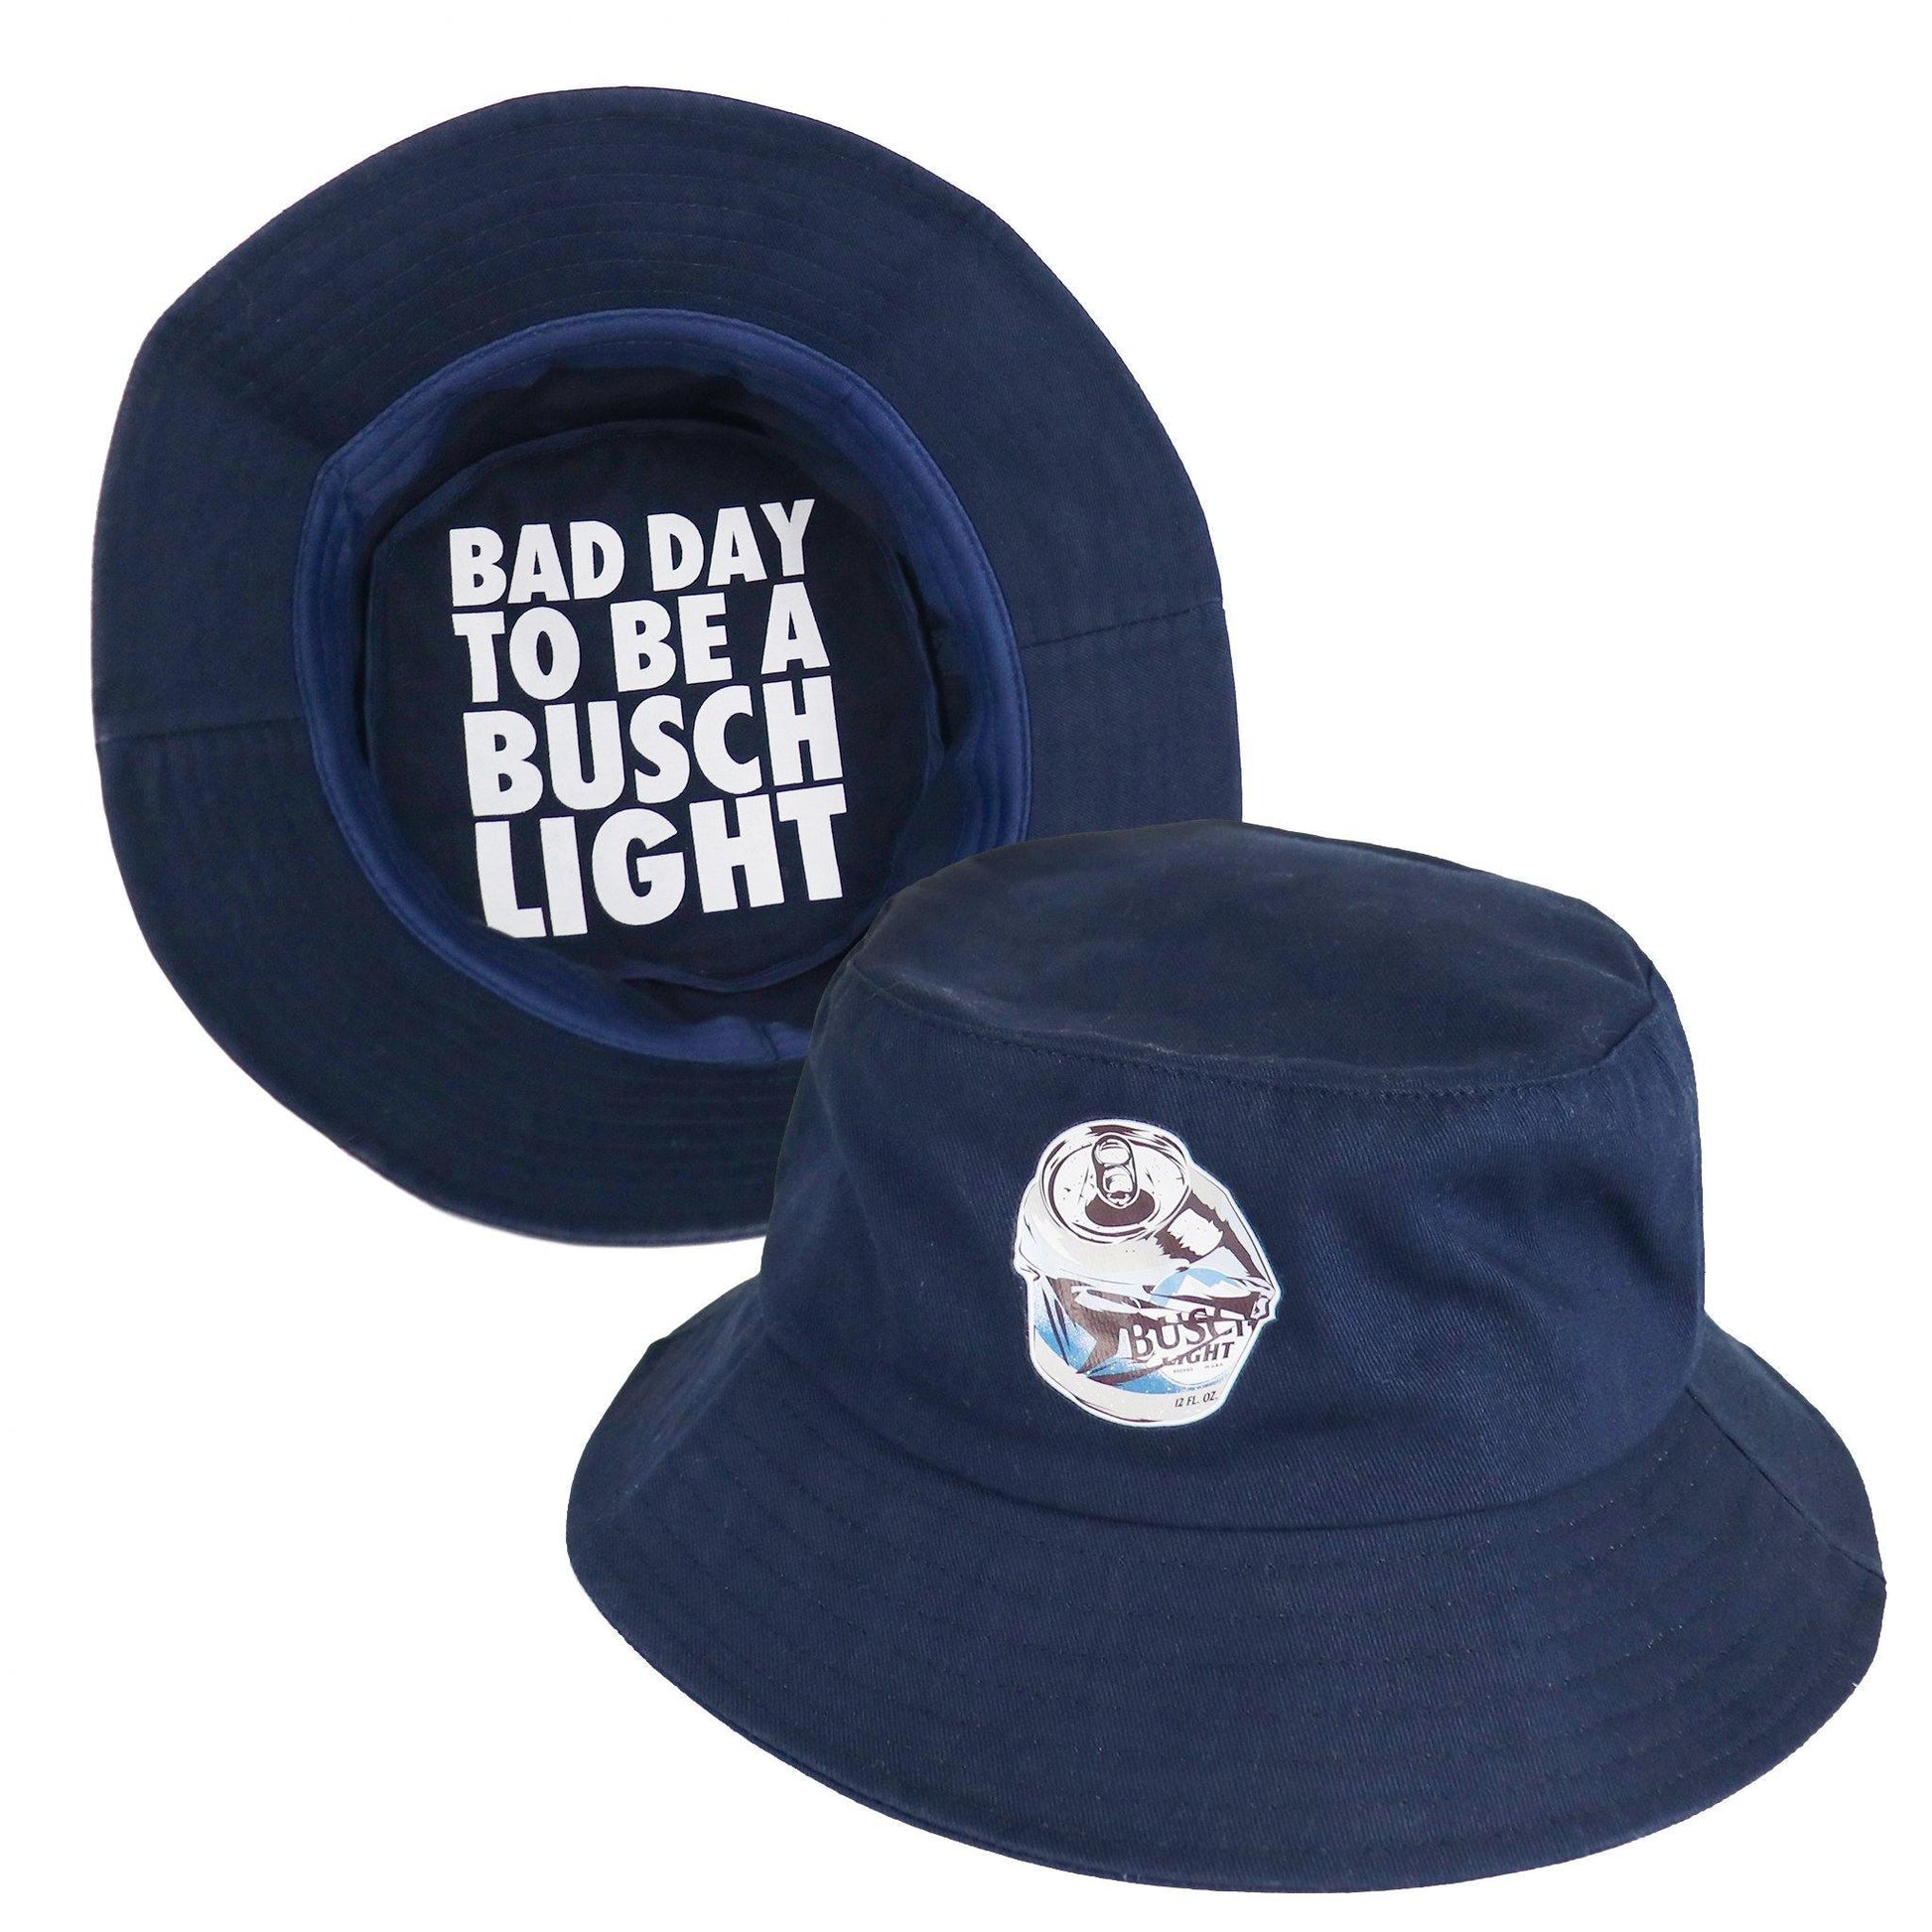 busch light bad day bucket hat that says bad day to be a busch light on the inside of hat and a busch light can smashed on the front of the hat